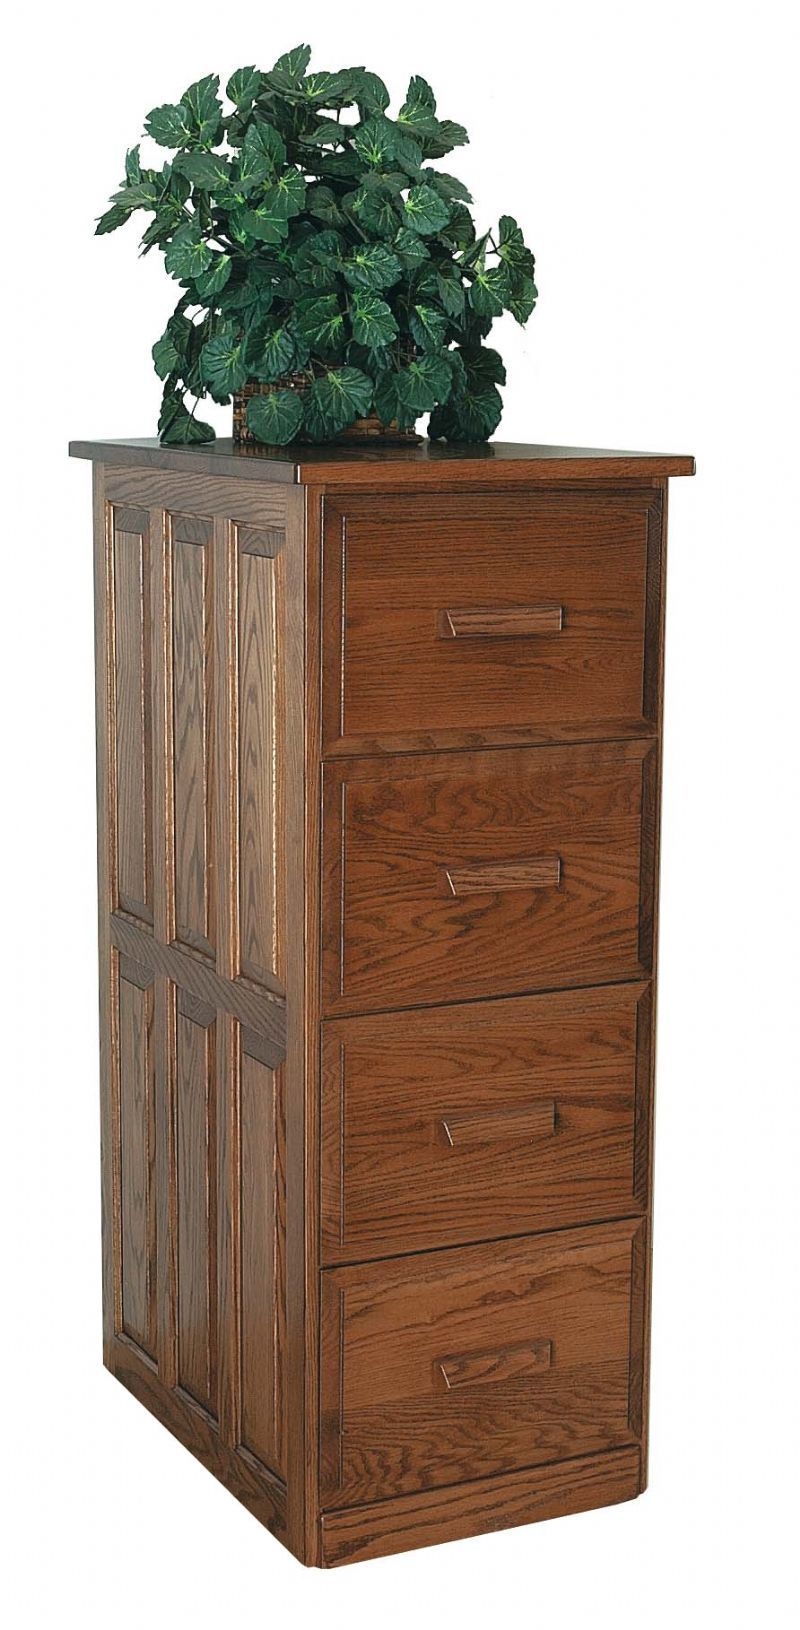 Solid wood four drawer vertical file cabinet